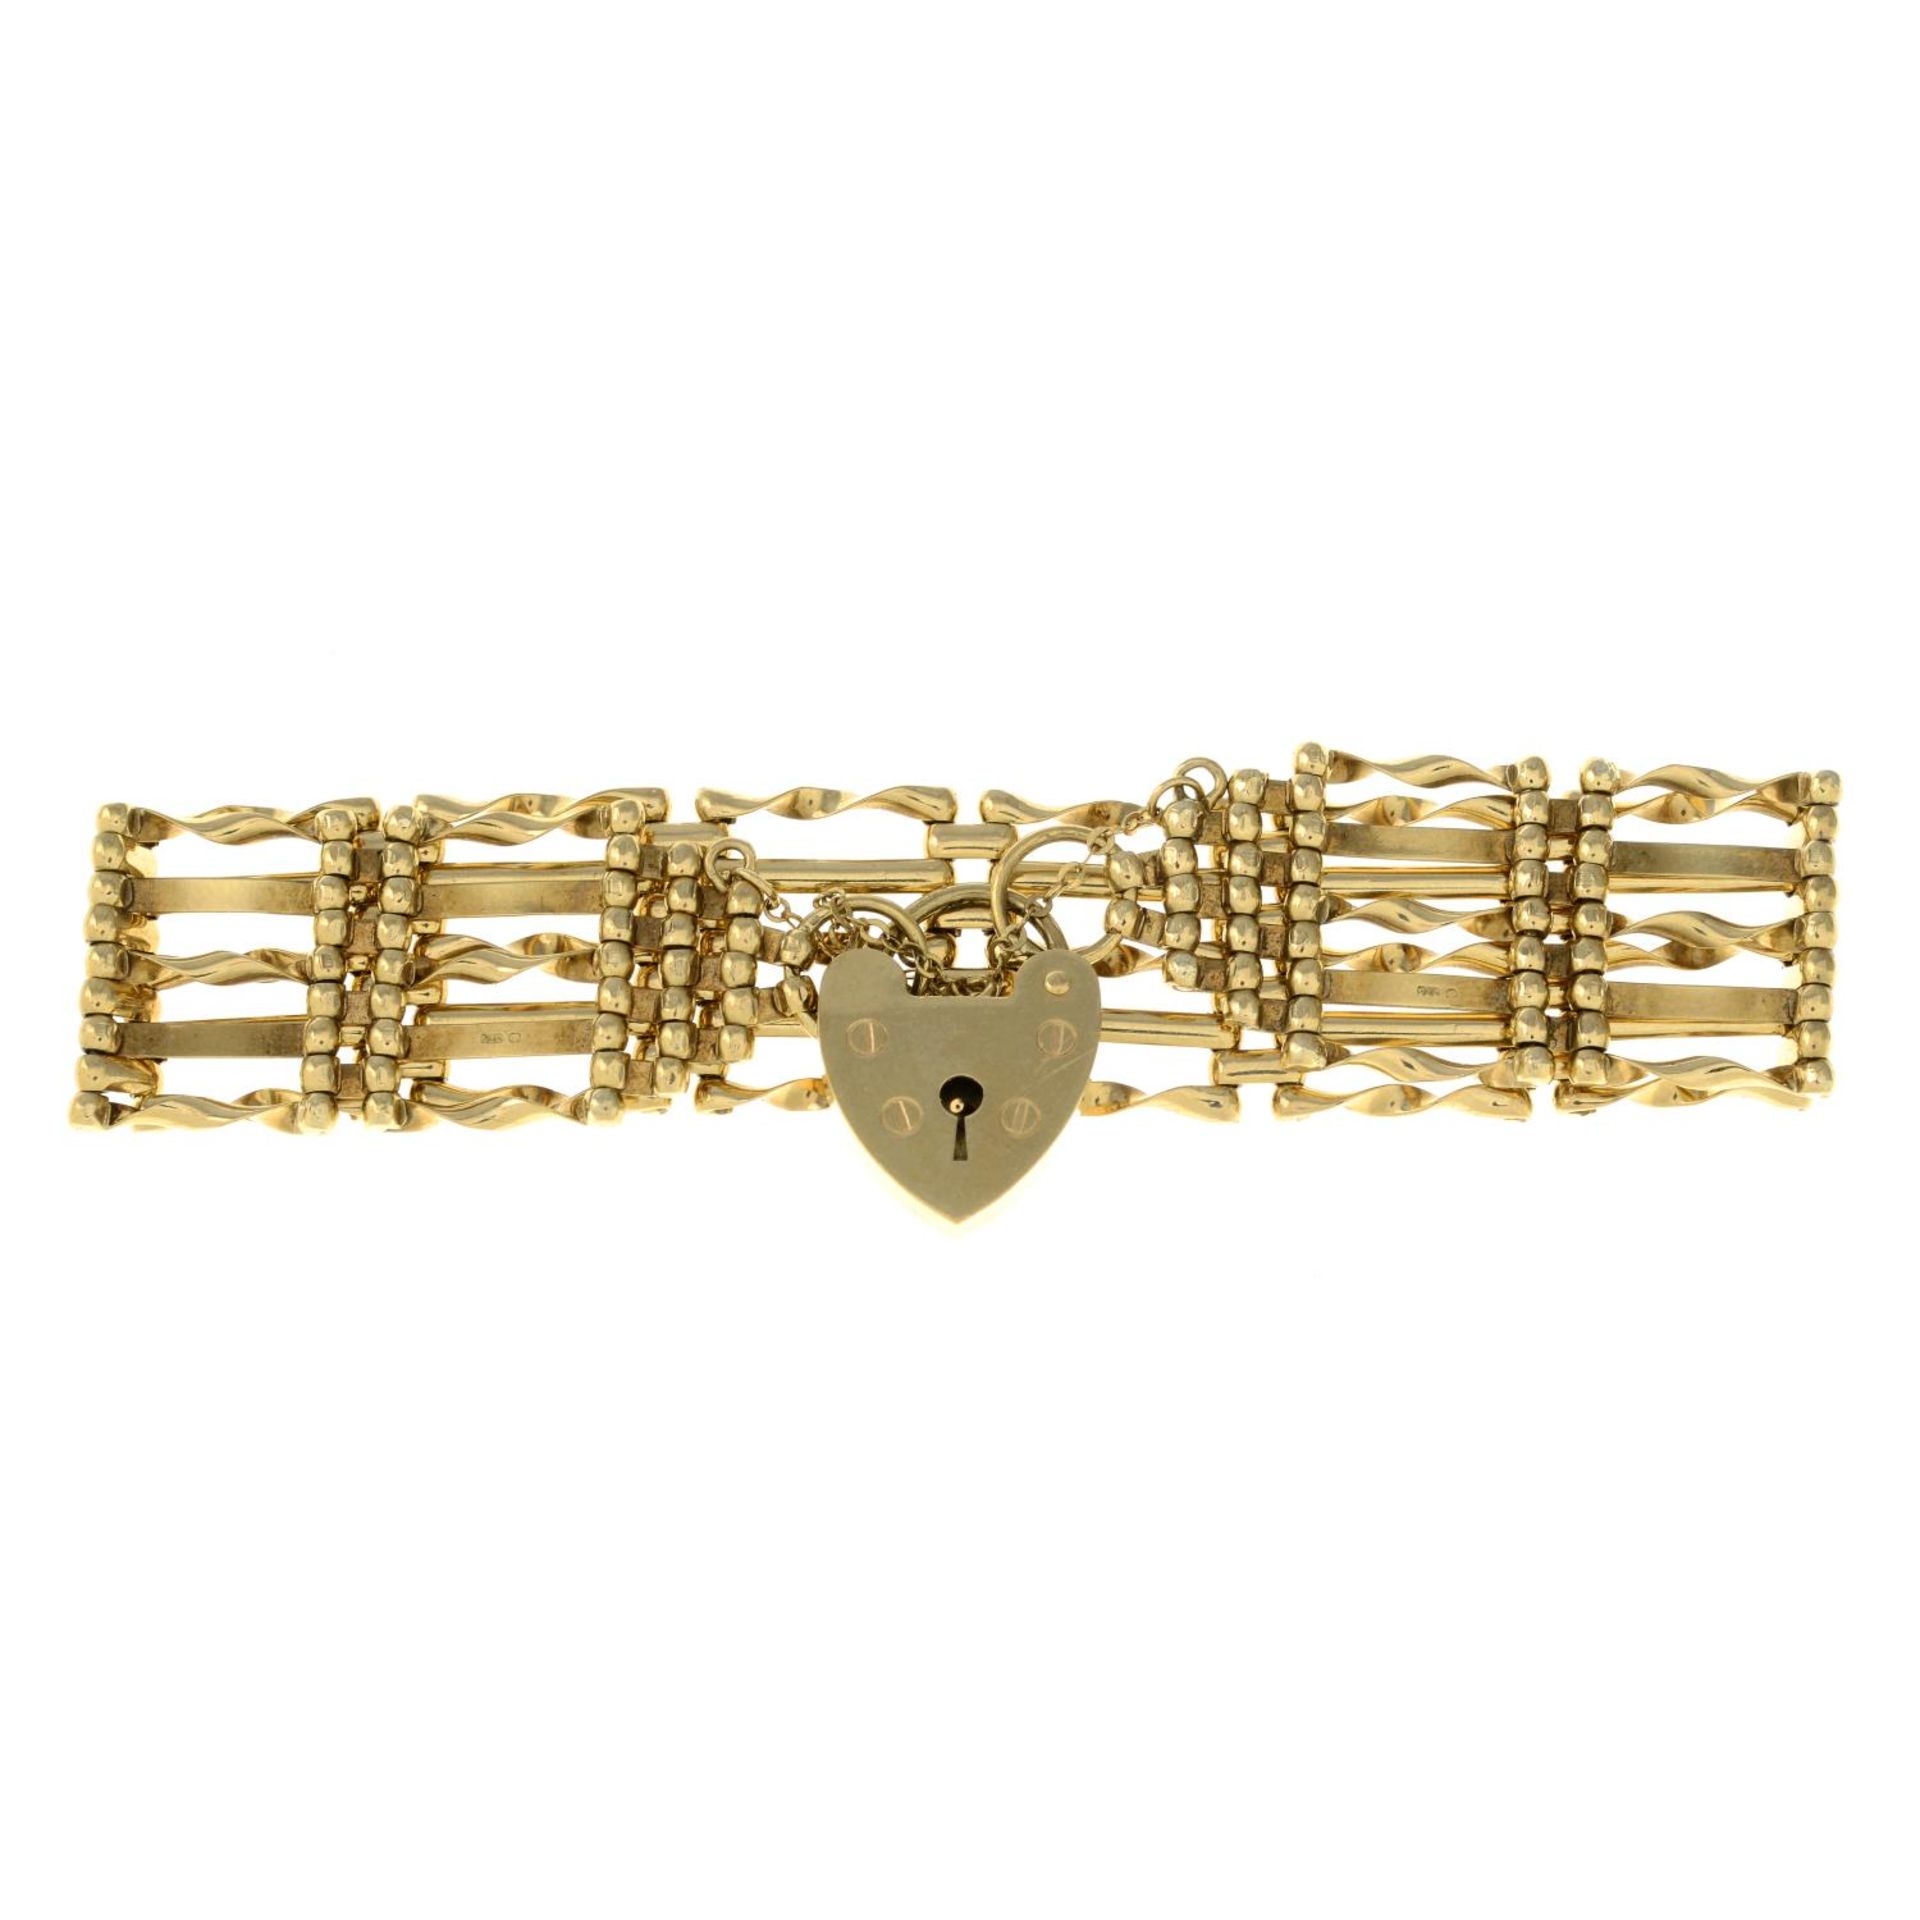 A 9ct gold gate-link bracelet, with heart padlock clasp.Hallmarks for London, 1976.Length 18cms.